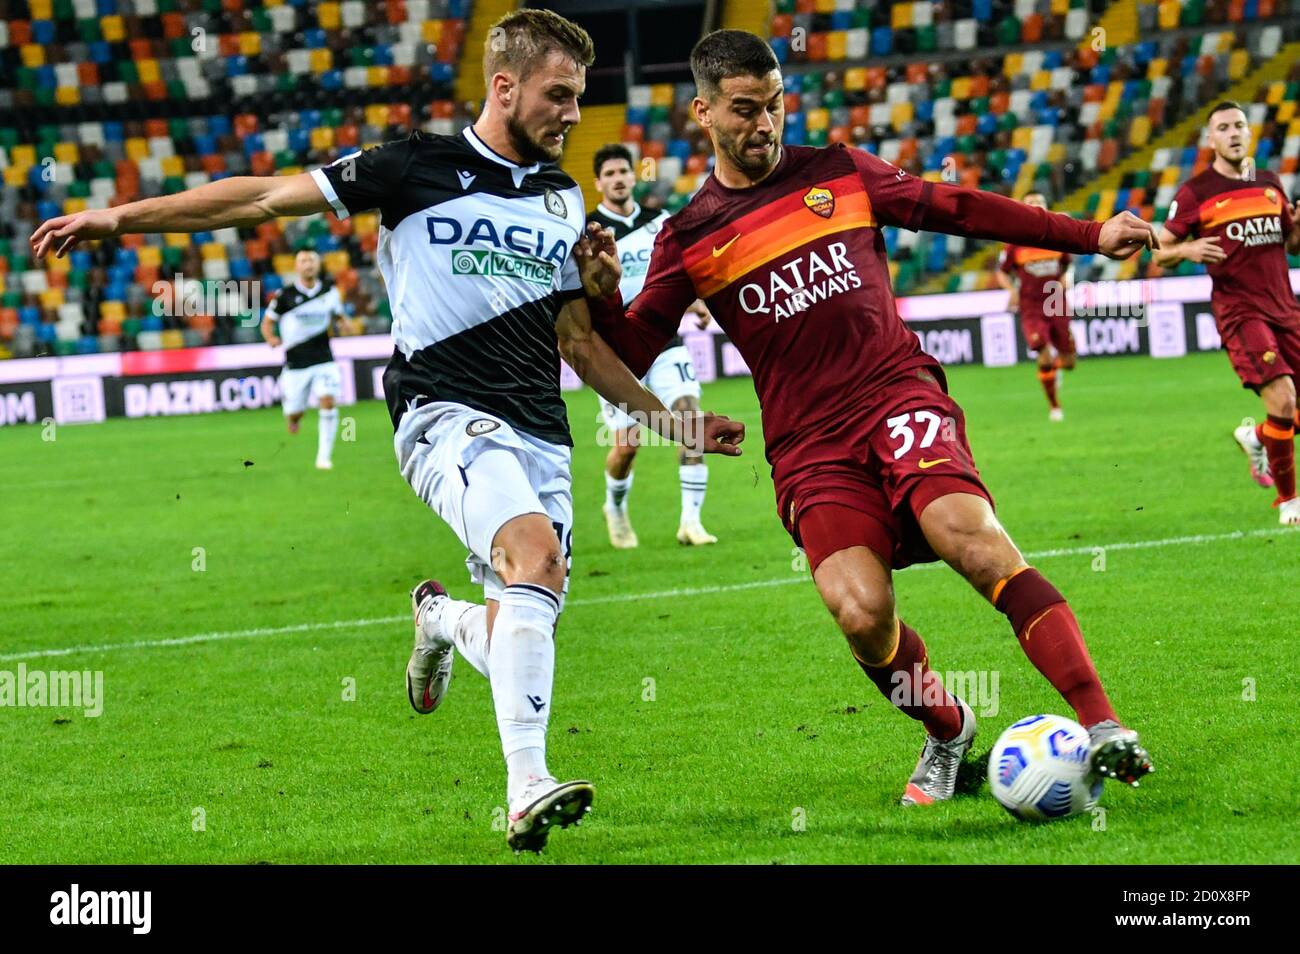 udine, Italy, 03 Oct 2020, Willem Ter Avest(Udinese Calcio) and Leonardo  Spinazzola (AS Roma) during Udinese vs Roma, italian soccer Serie A match -  Credit: LM/Alessio Marini/Alamy Live News Stock Photo -